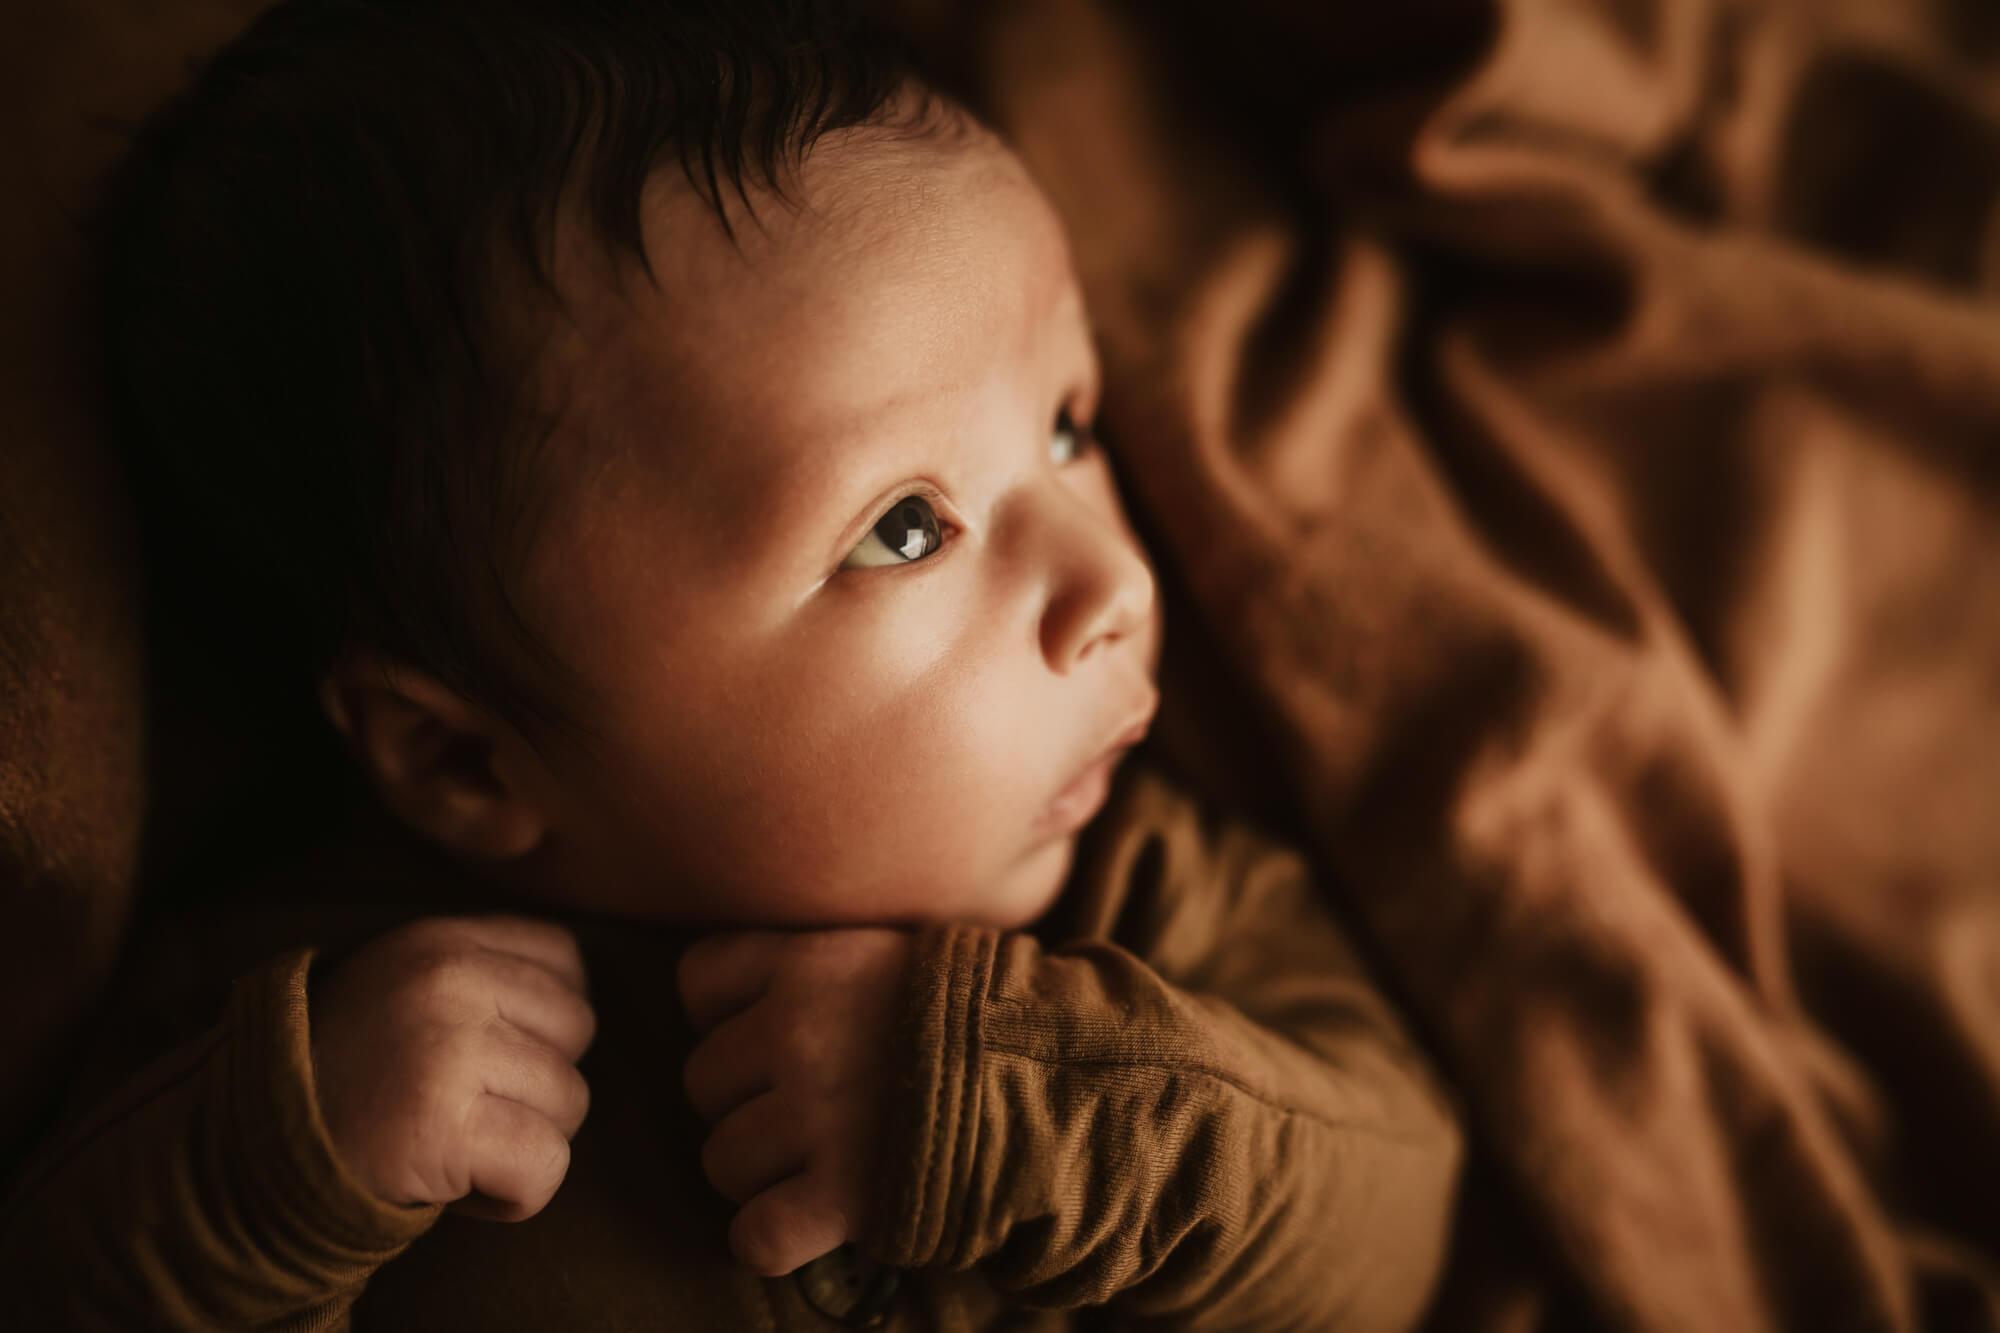 A newborn baby lays on a brown blanket while looking up at a window